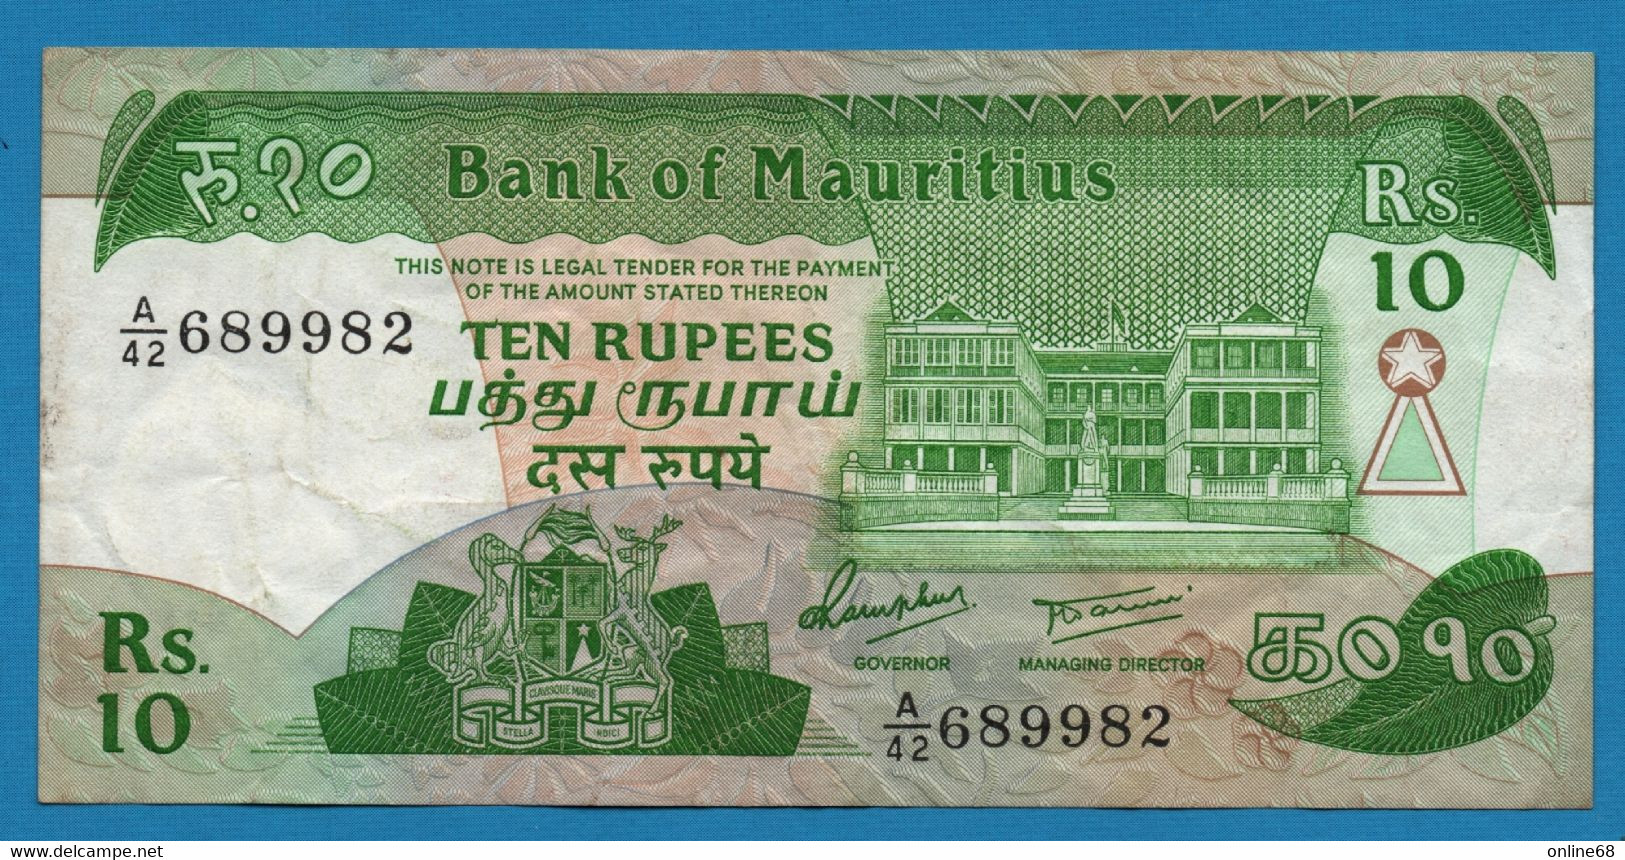 MAURITIUS 10 RUPEES ND (1985) # A/42 689982 P# 35 Government Building - Maurice